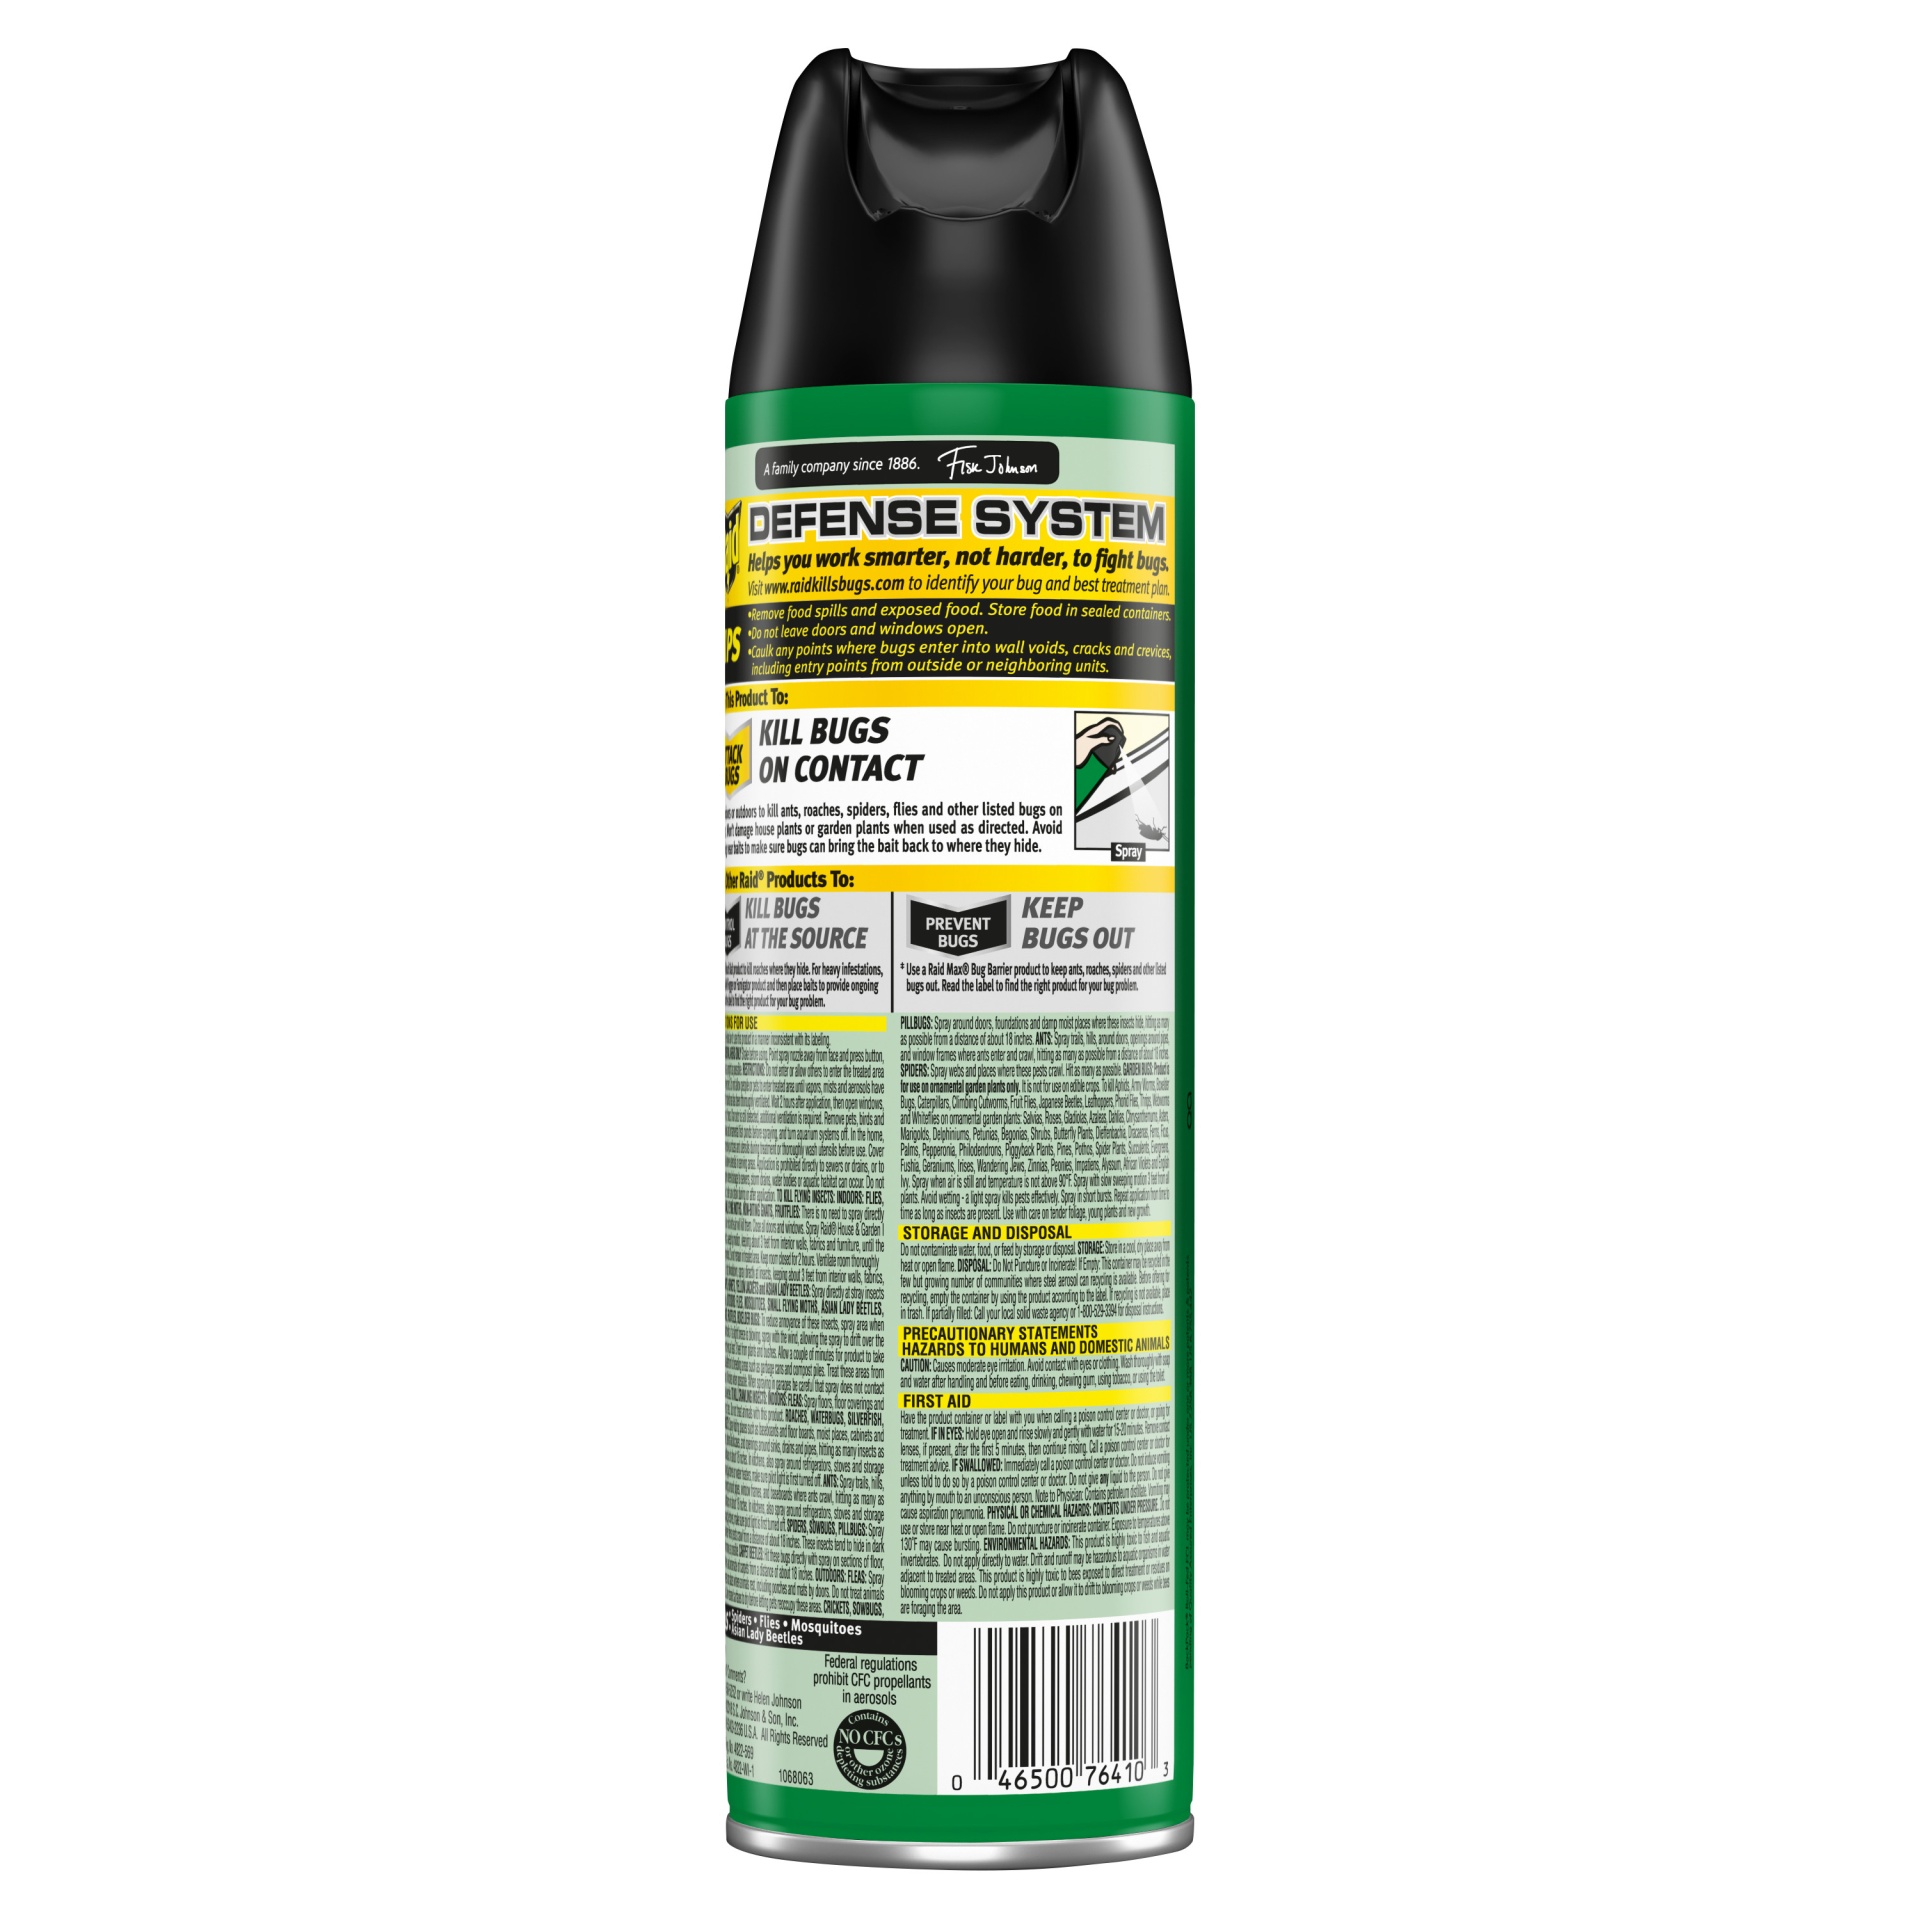 slide 2 of 7, Raid House And Garden Bug Killer Insecticide, 11 oz